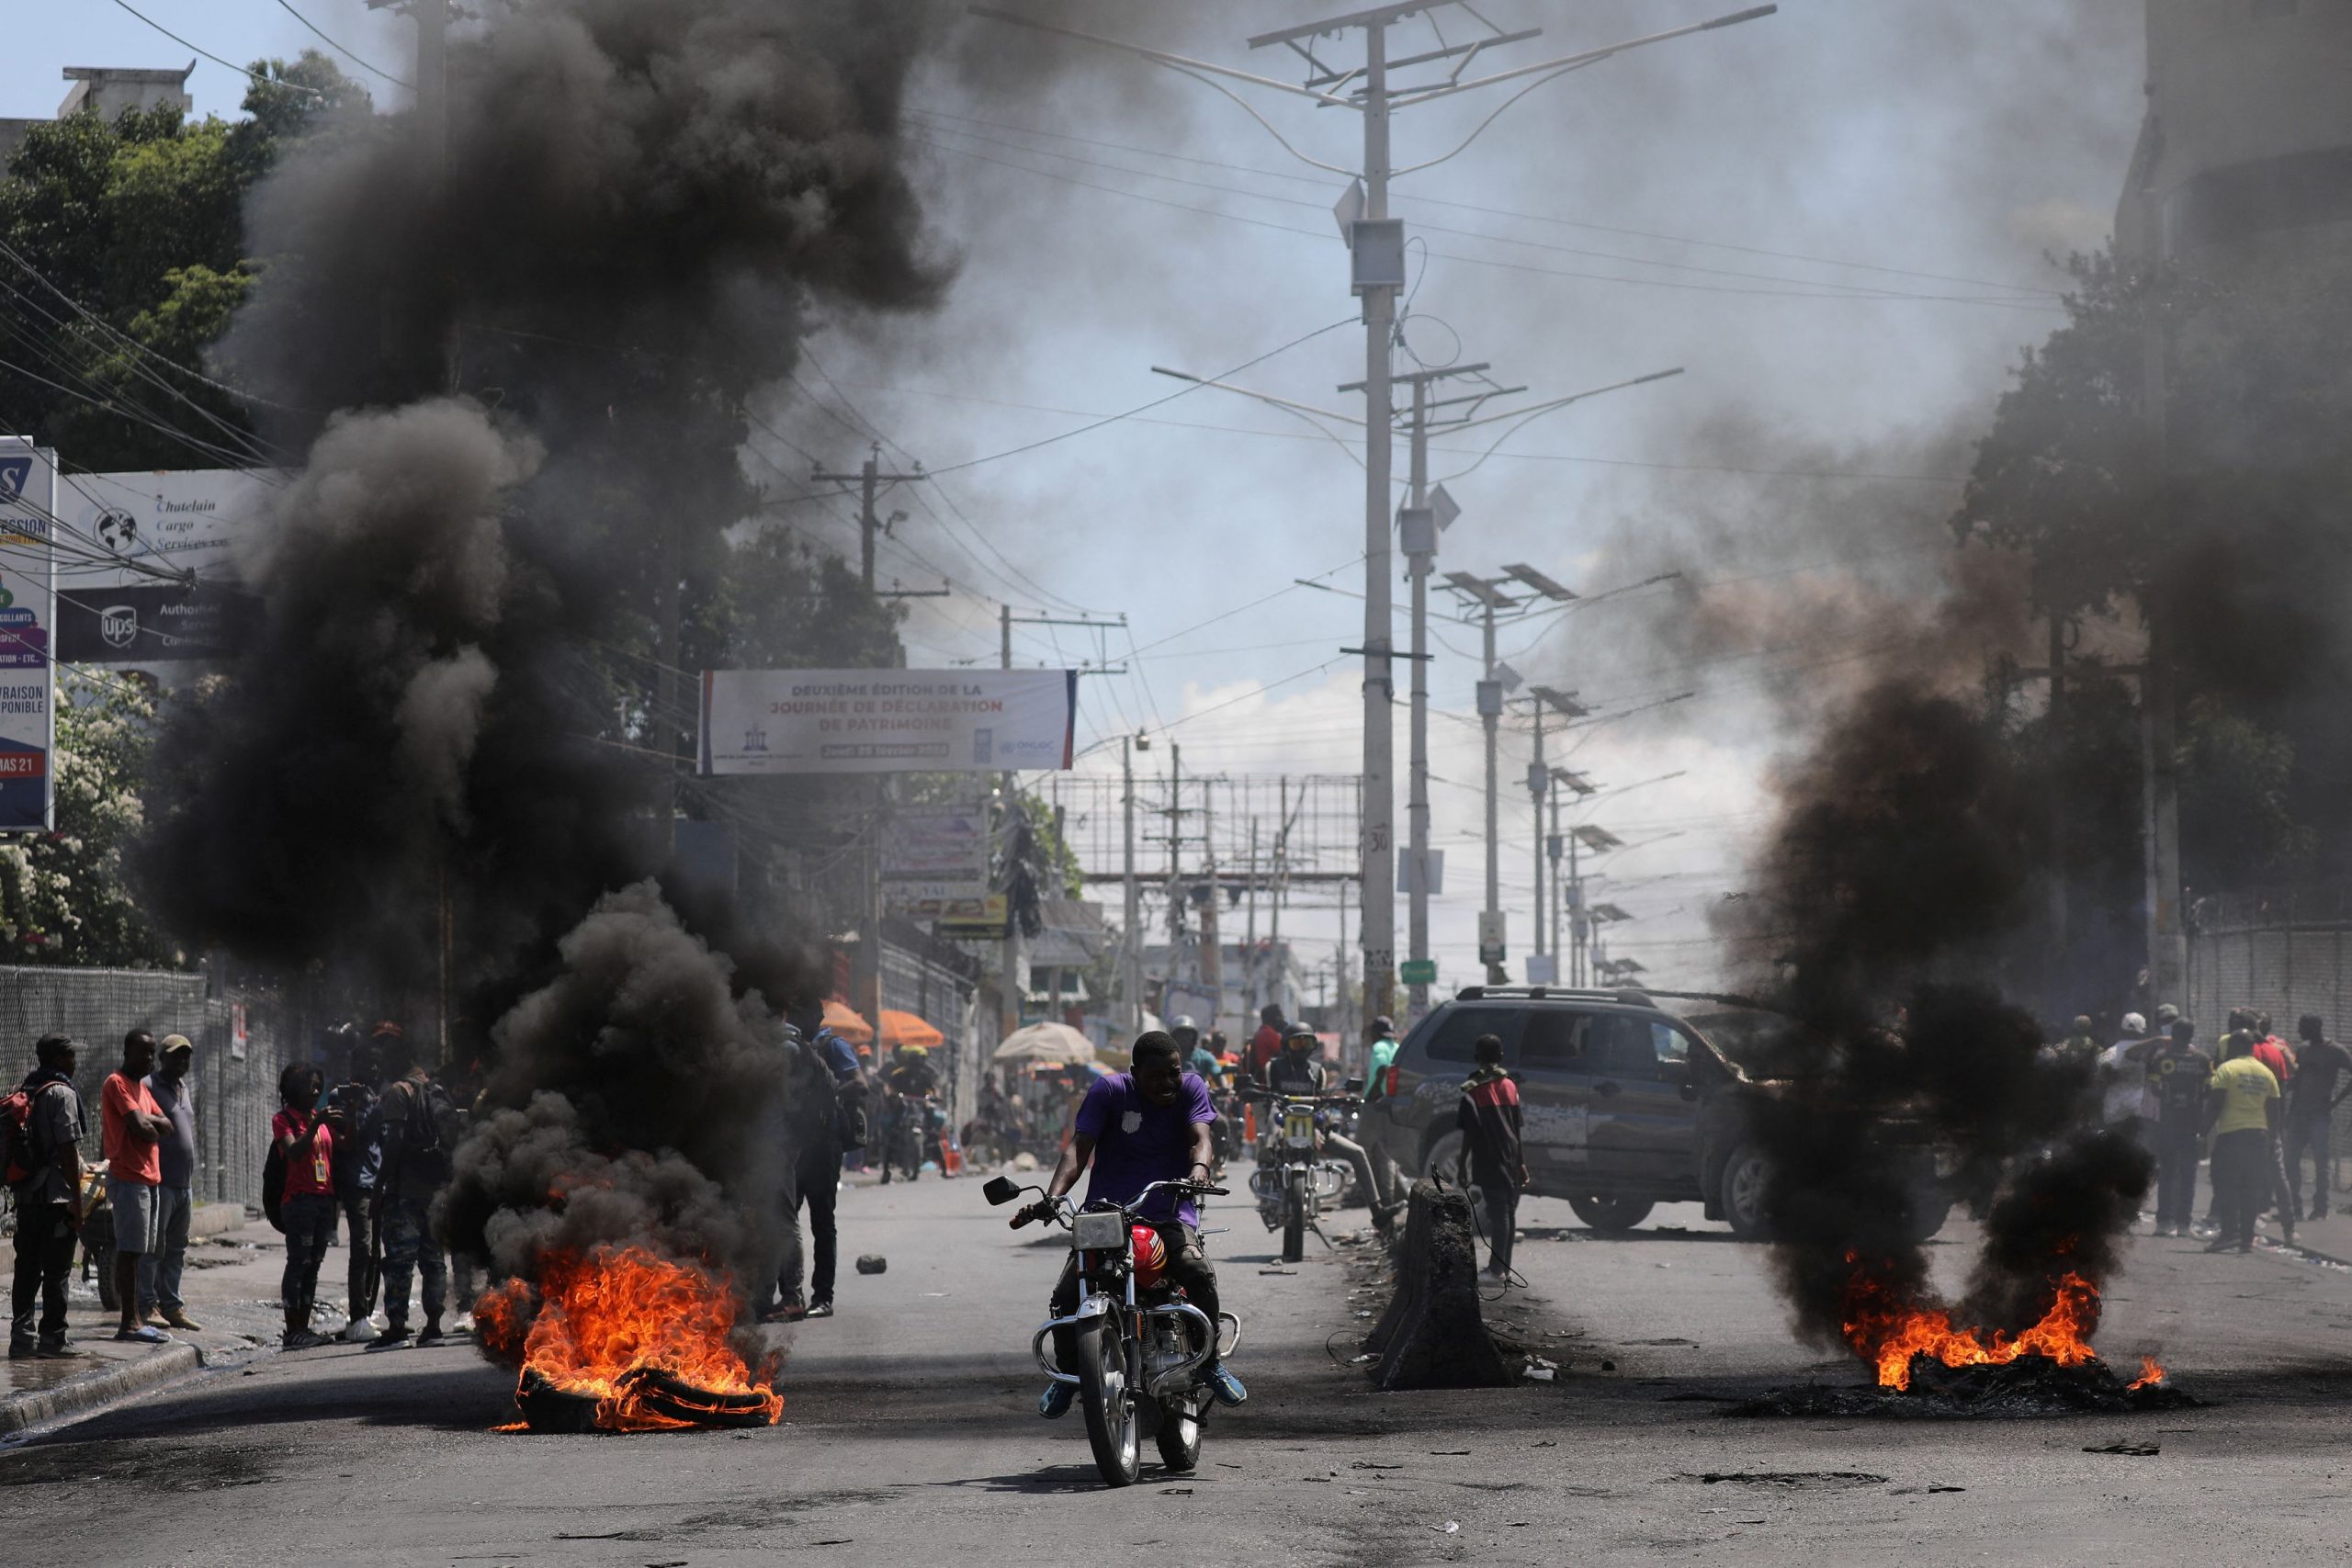 Chaos in Haiti Leaves U.S. With Few Options